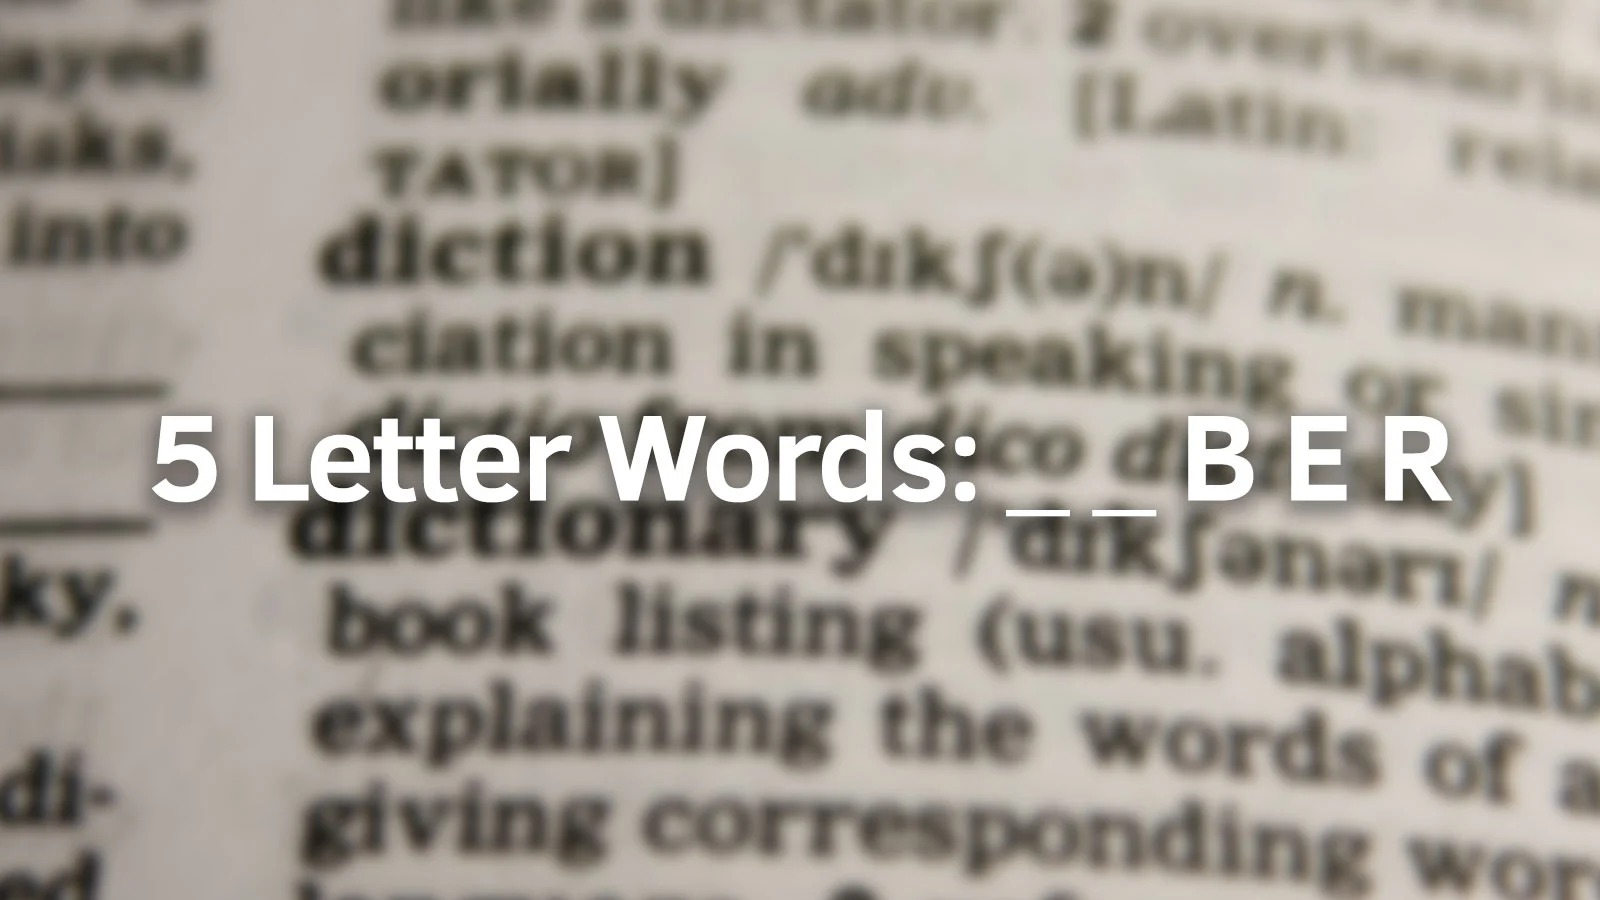 Wordle: 5-Letter Words That End with BER